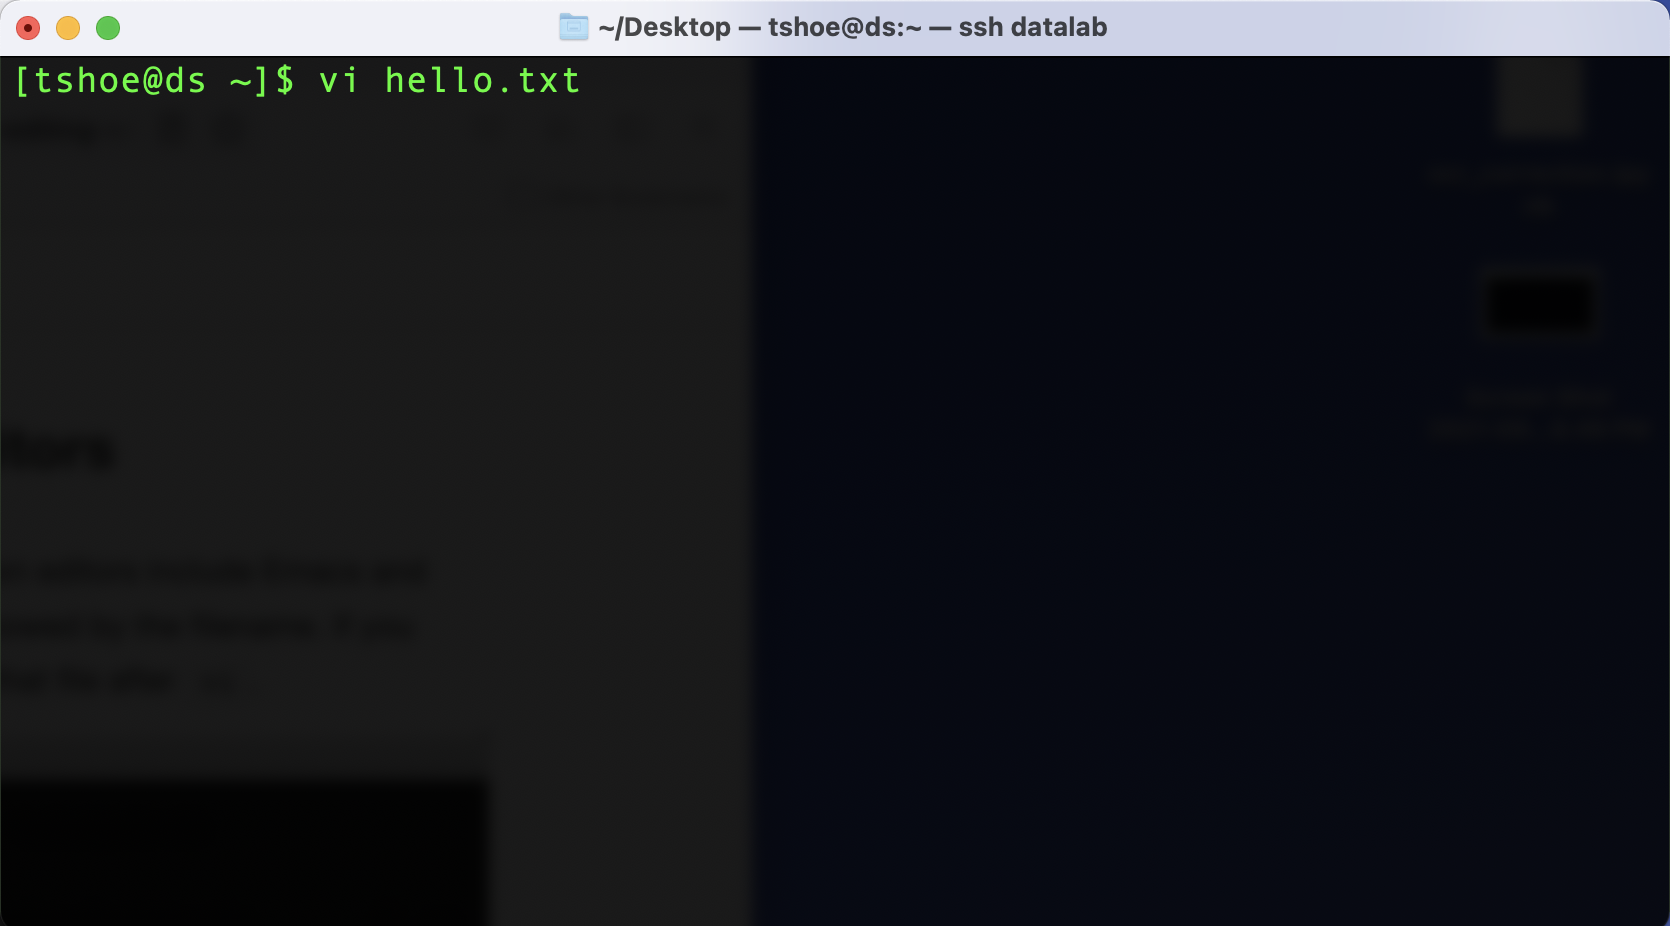 Creating a new text file with Vim on the command line